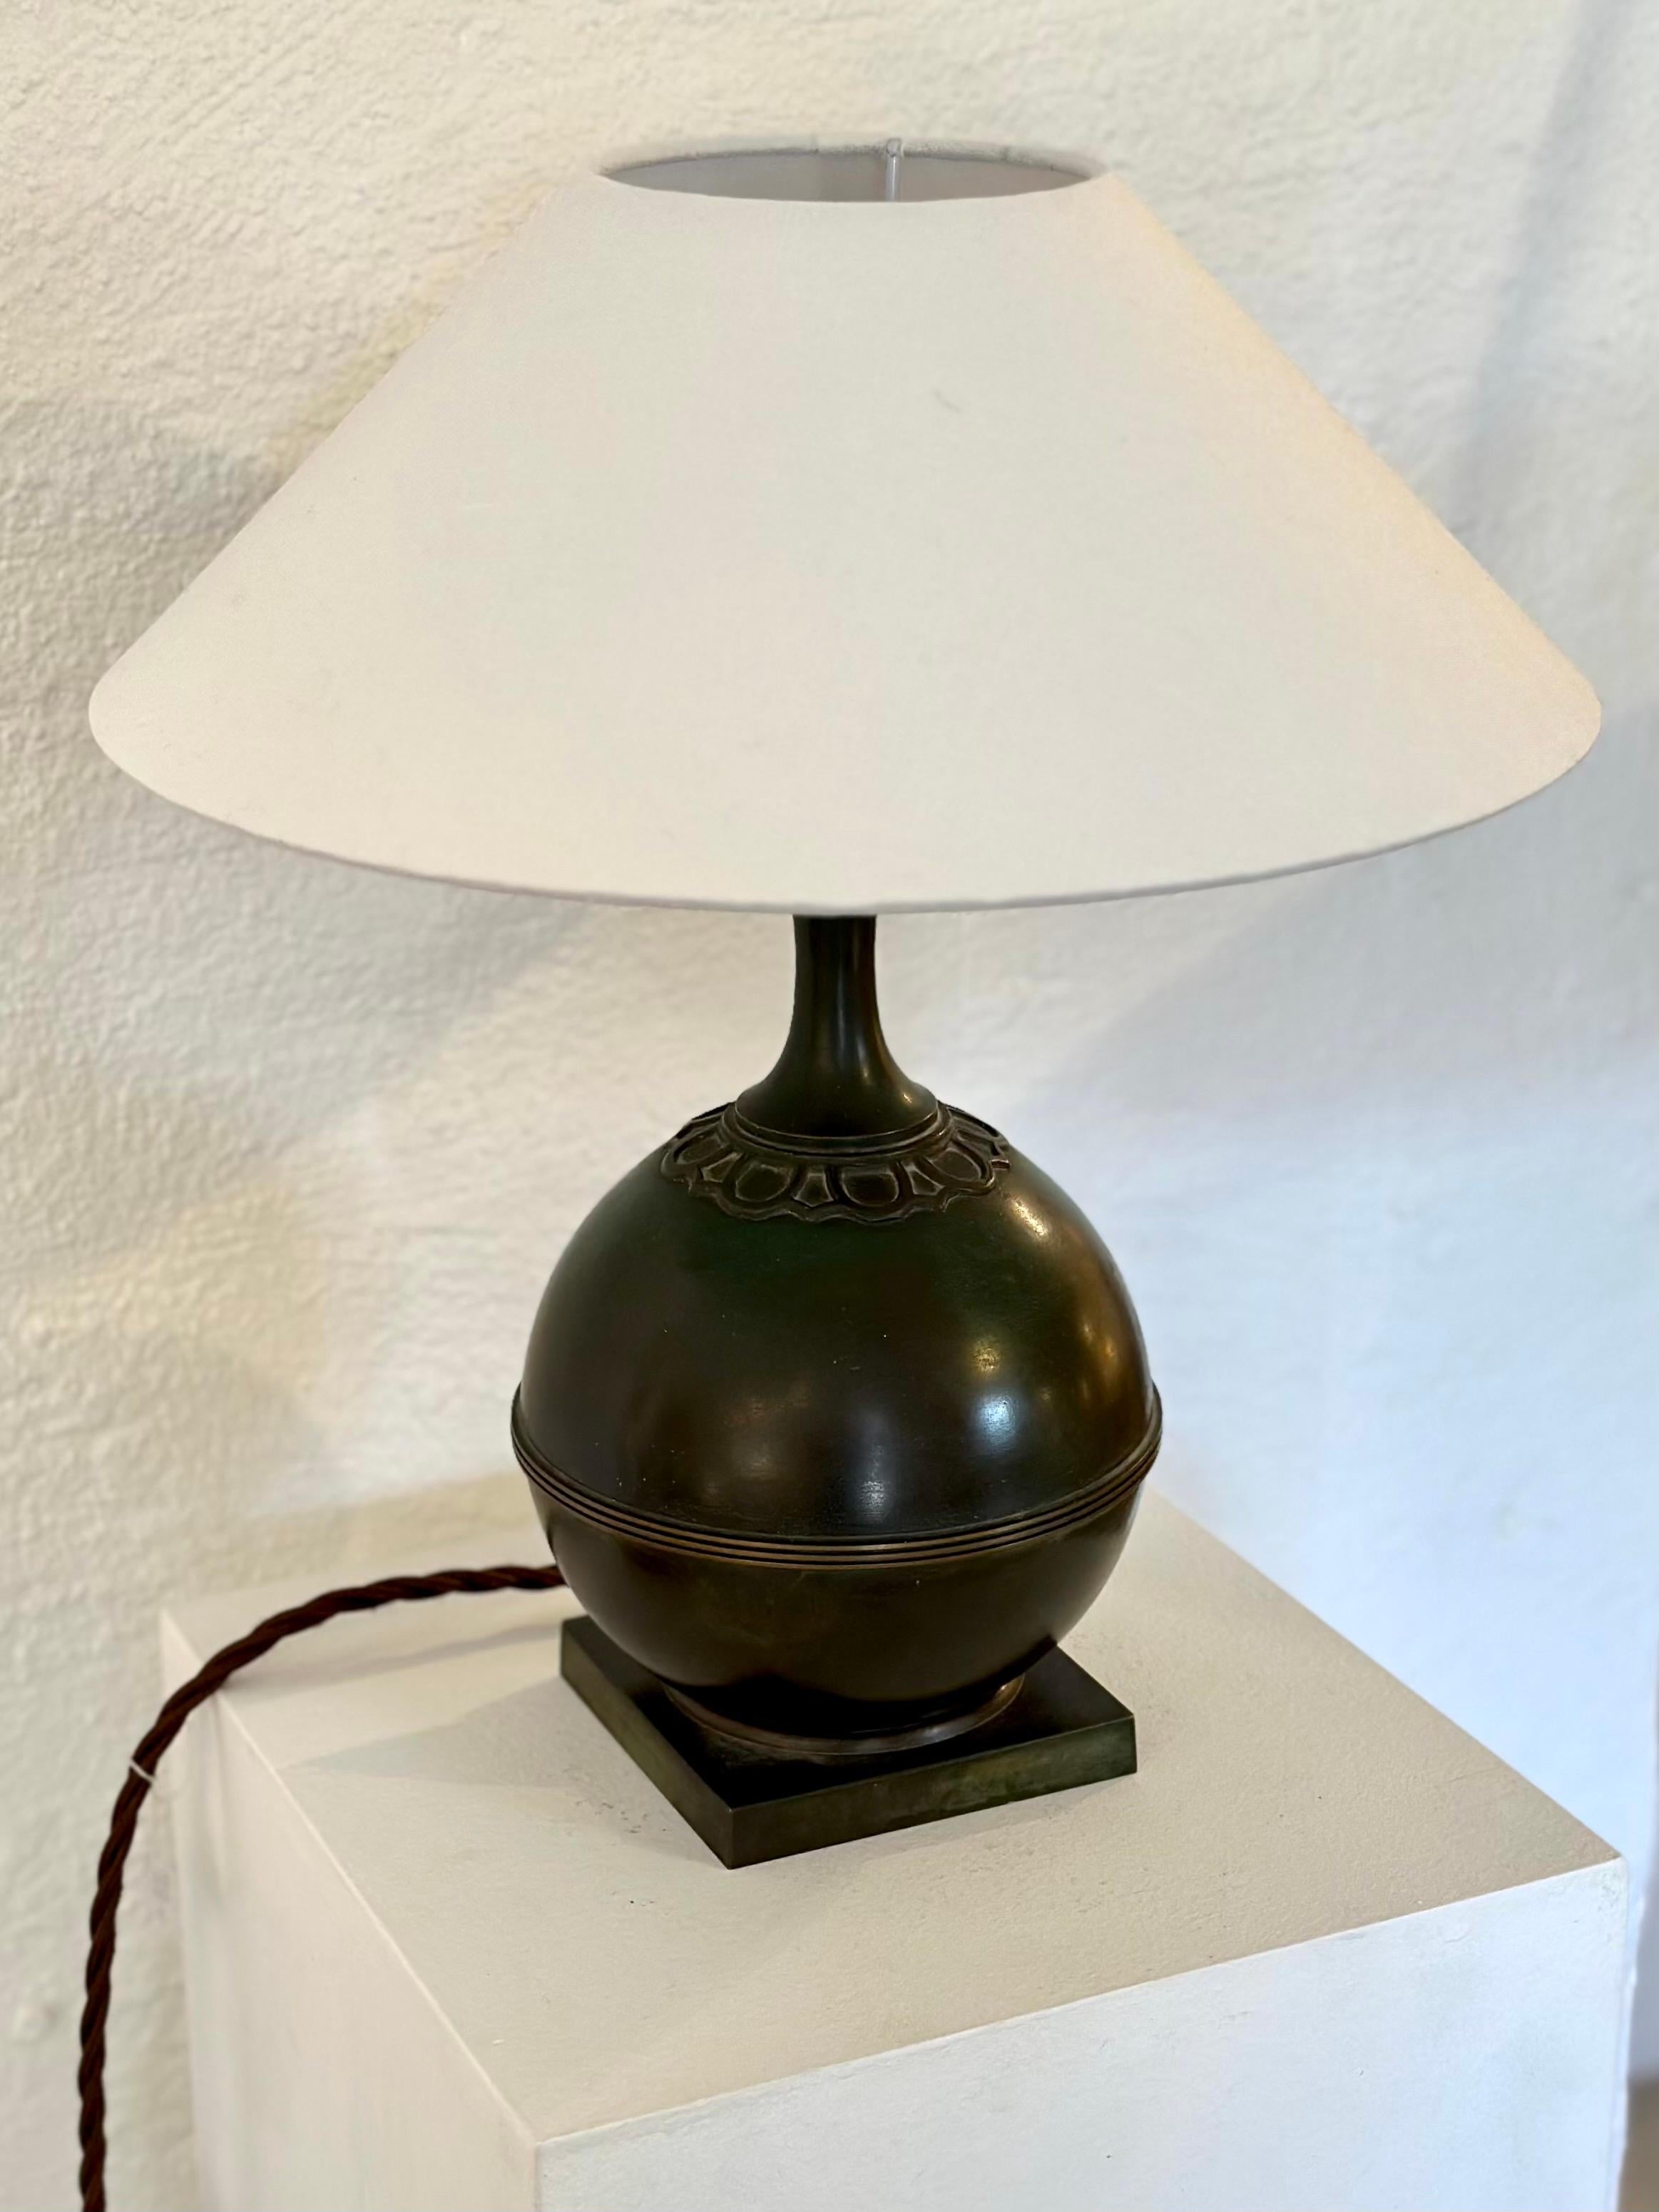 Mid-20th Century Swedish Modern Patinated Bronze Table Lamp by GAB Guldsmedsaktiebolaget, 1930s For Sale